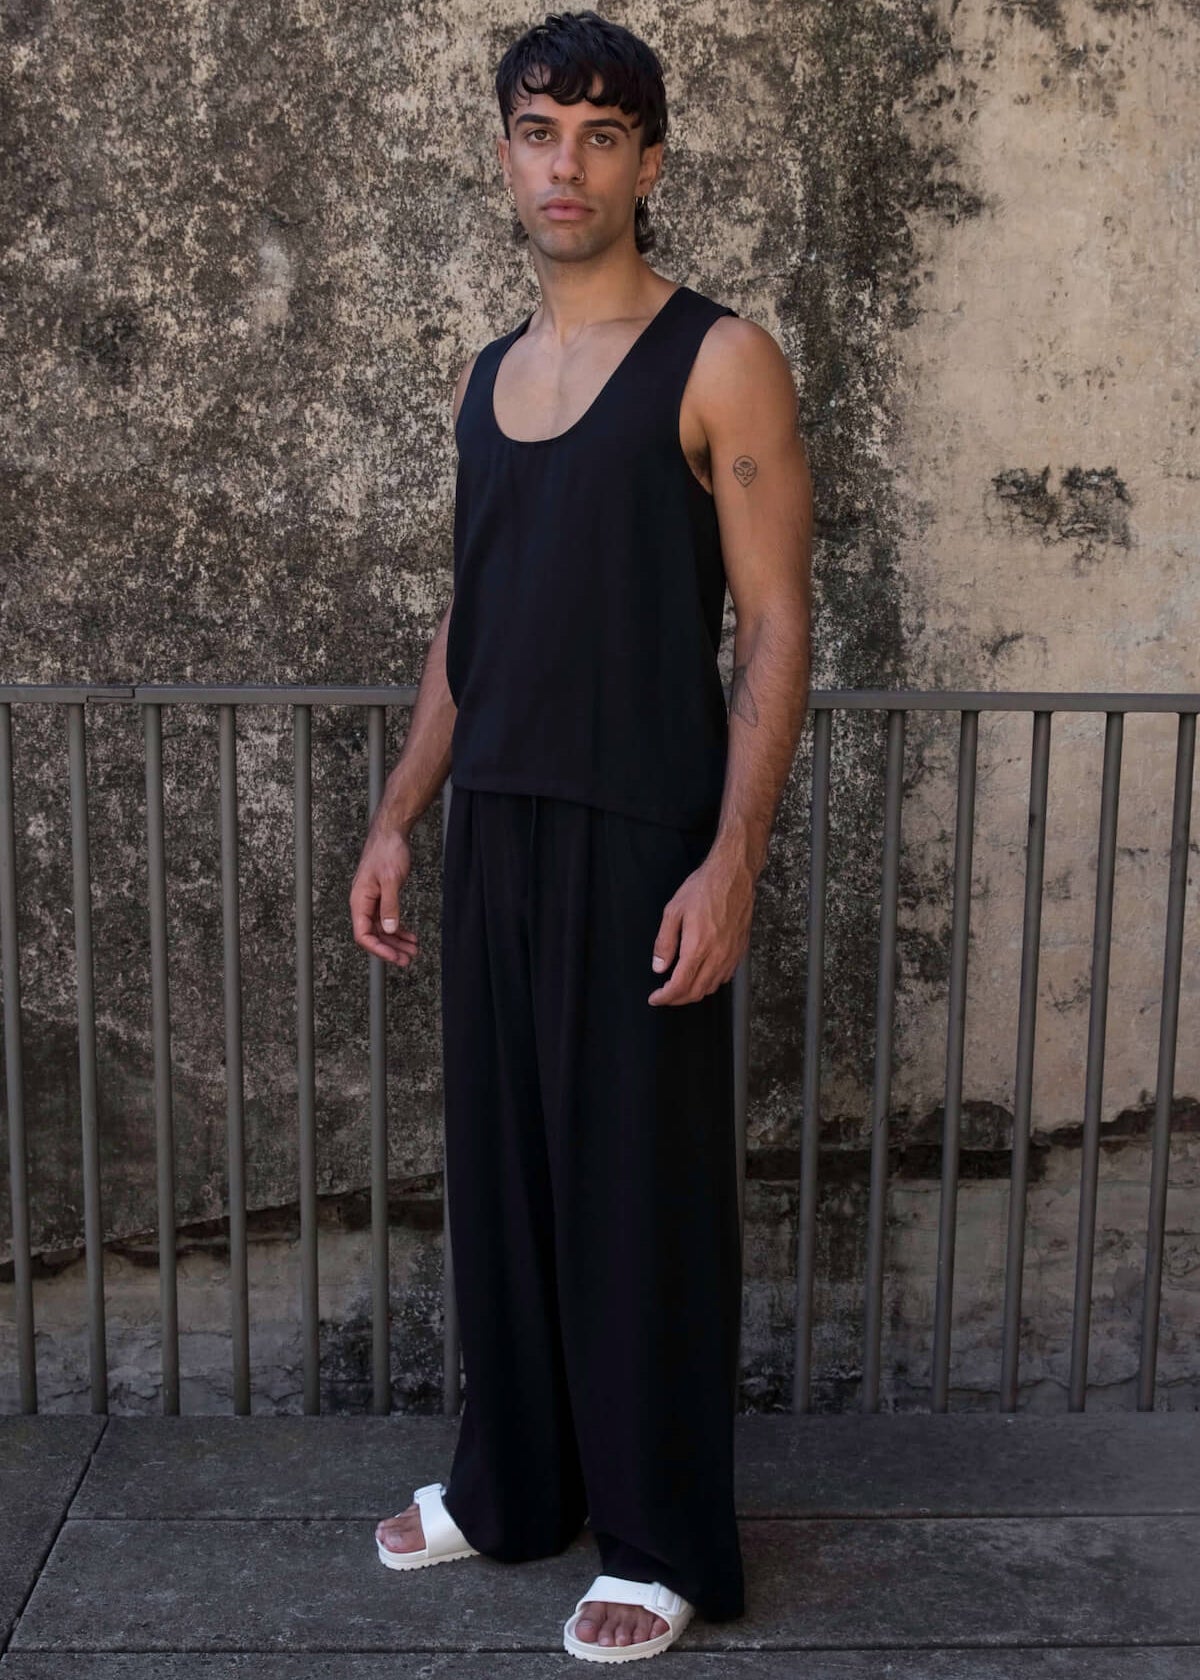 Men's high waisted pants and low cut singlet for men